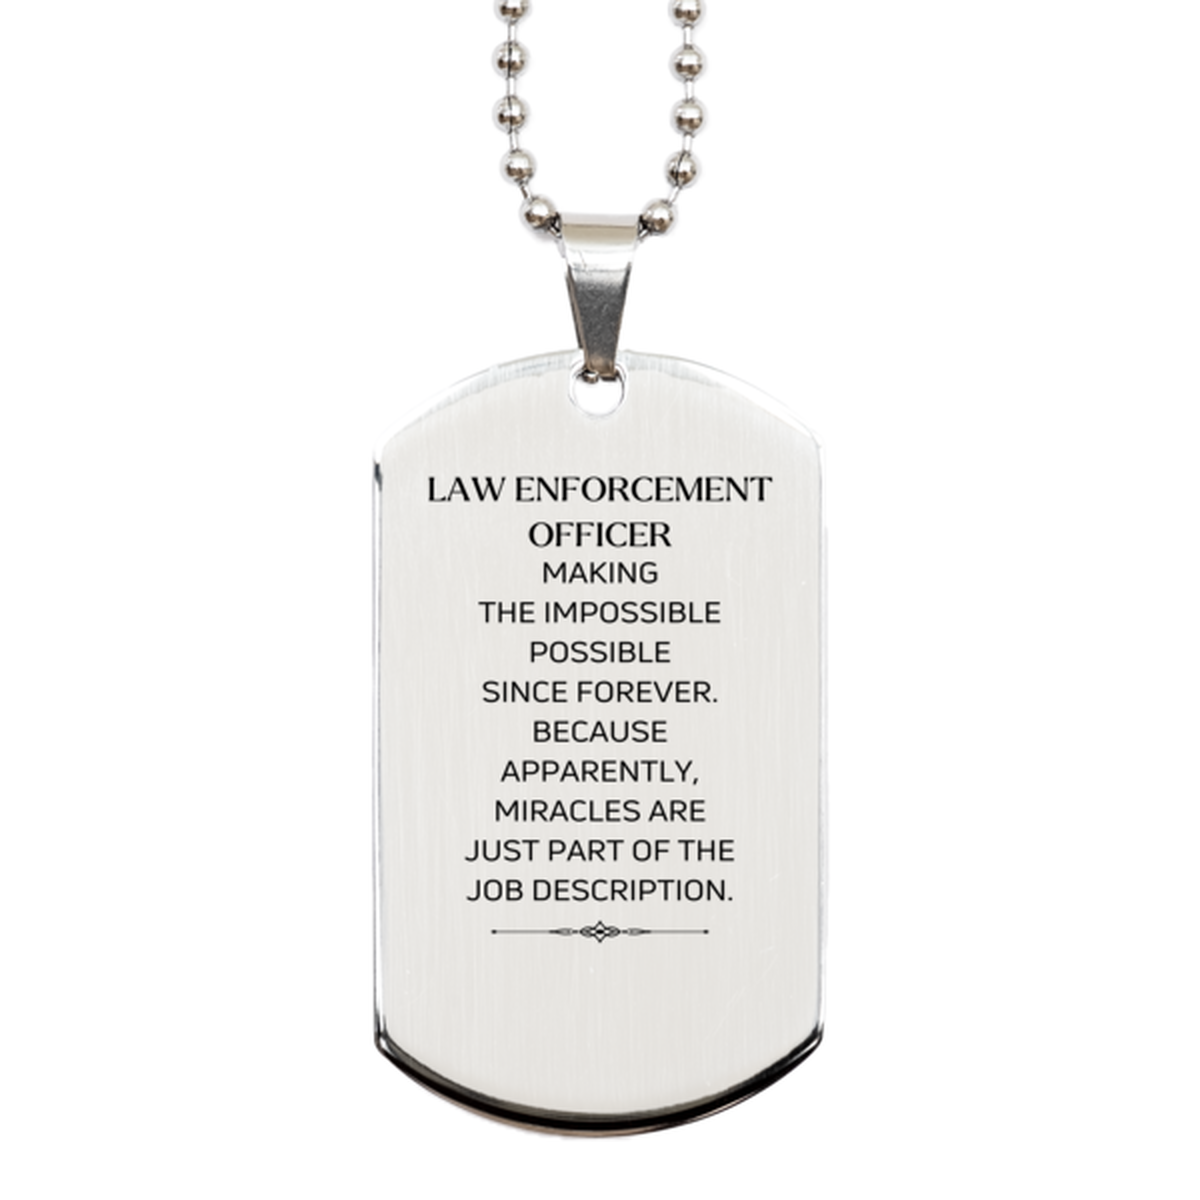 Funny Law Enforcement Officer Gifts, Miracles are just part of the job description, Inspirational Birthday Silver Dog Tag For Law Enforcement Officer, Men, Women, Coworkers, Friends, Boss